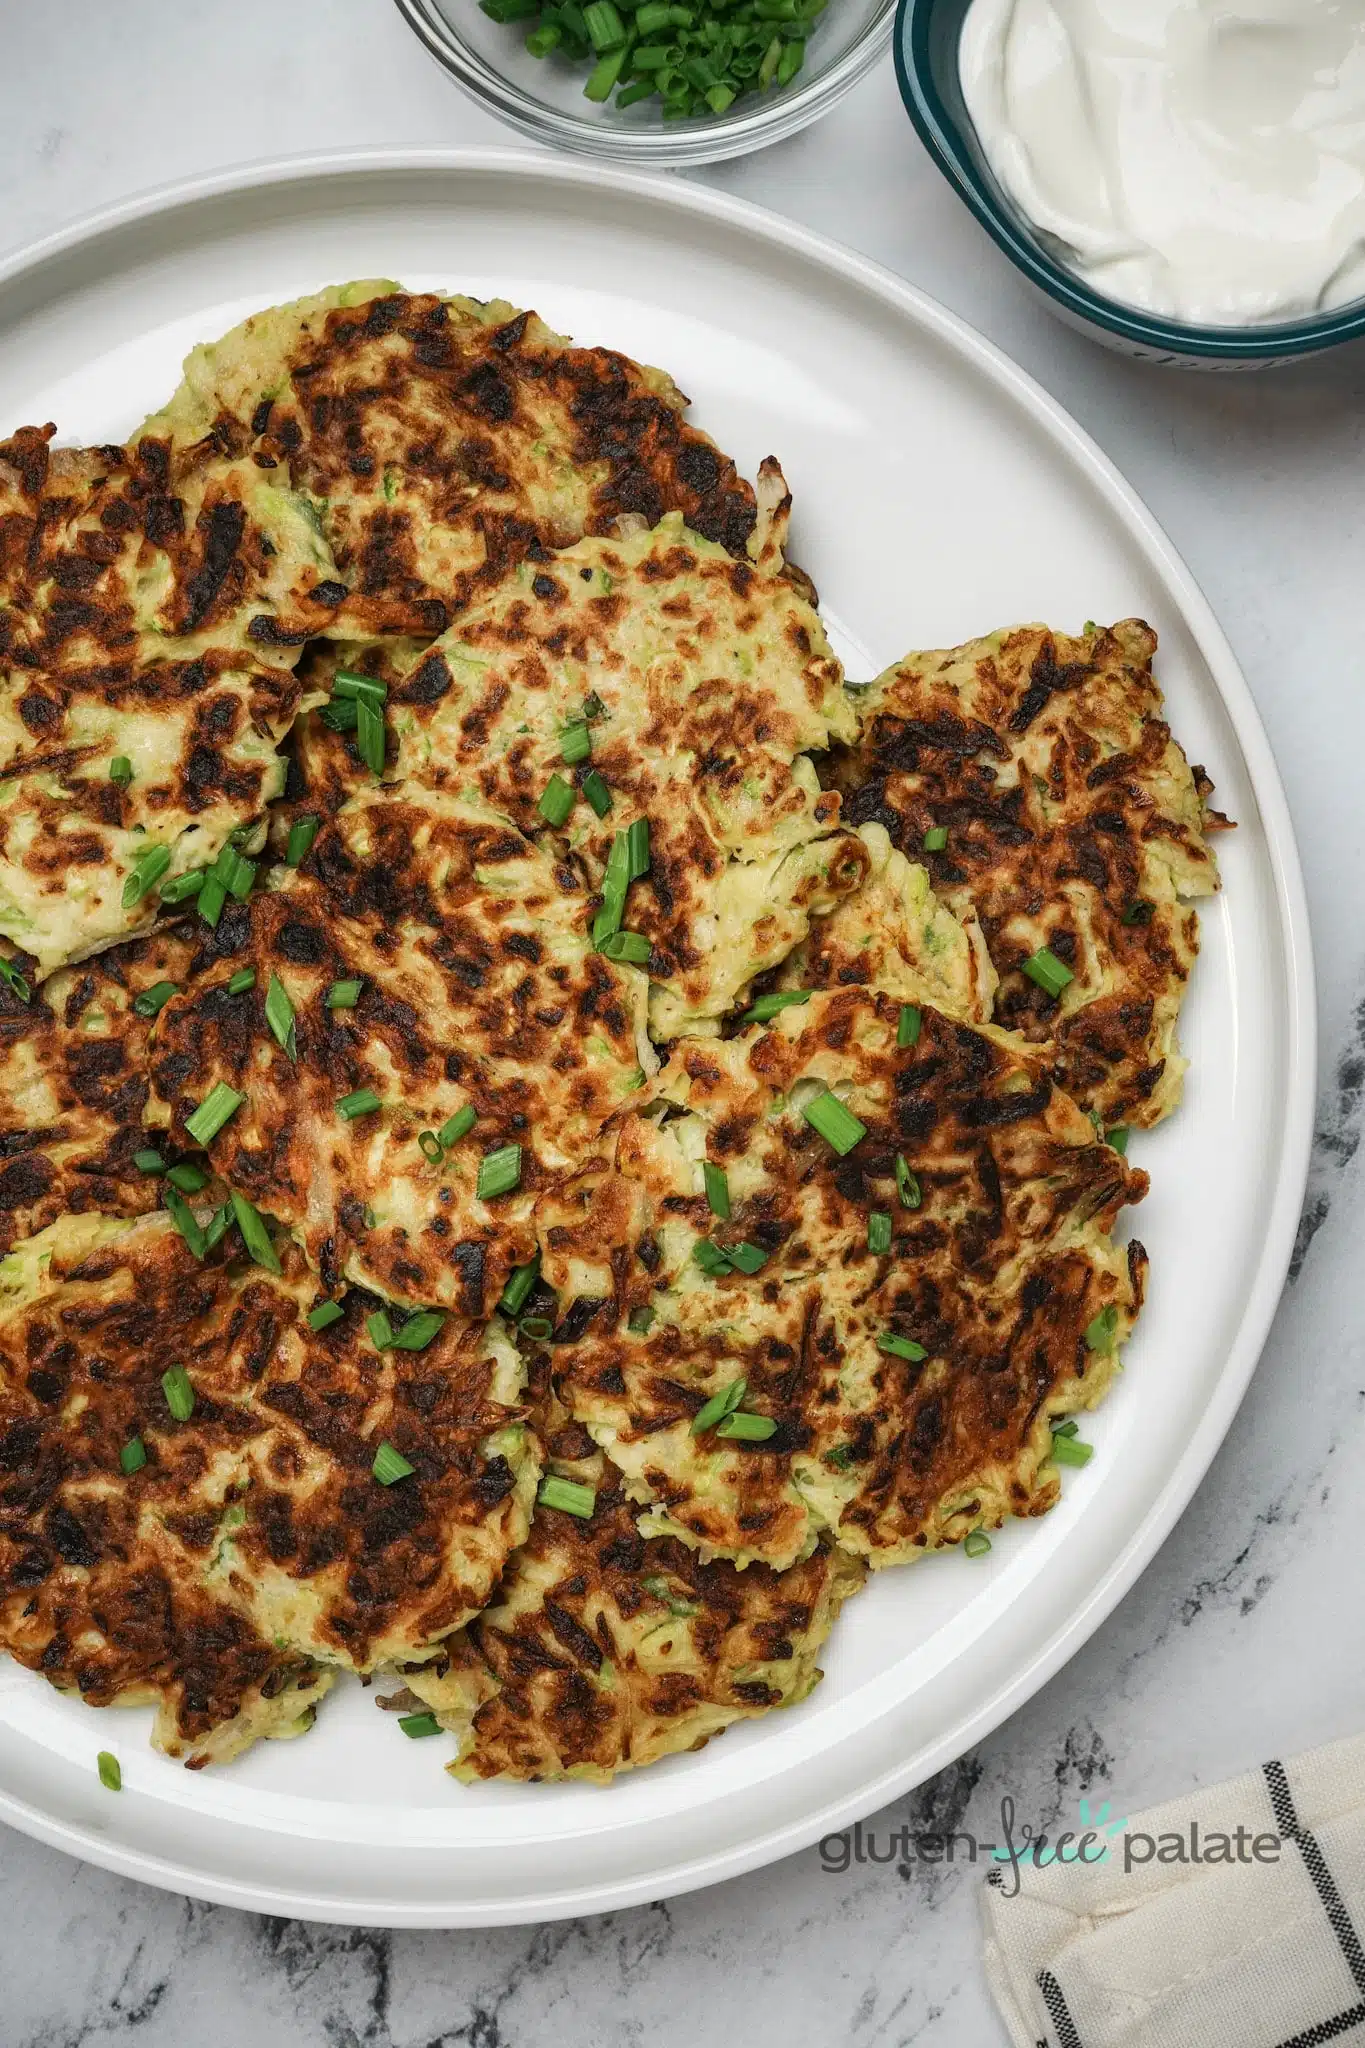 Gluten-free zucchini fritters on a white plate.